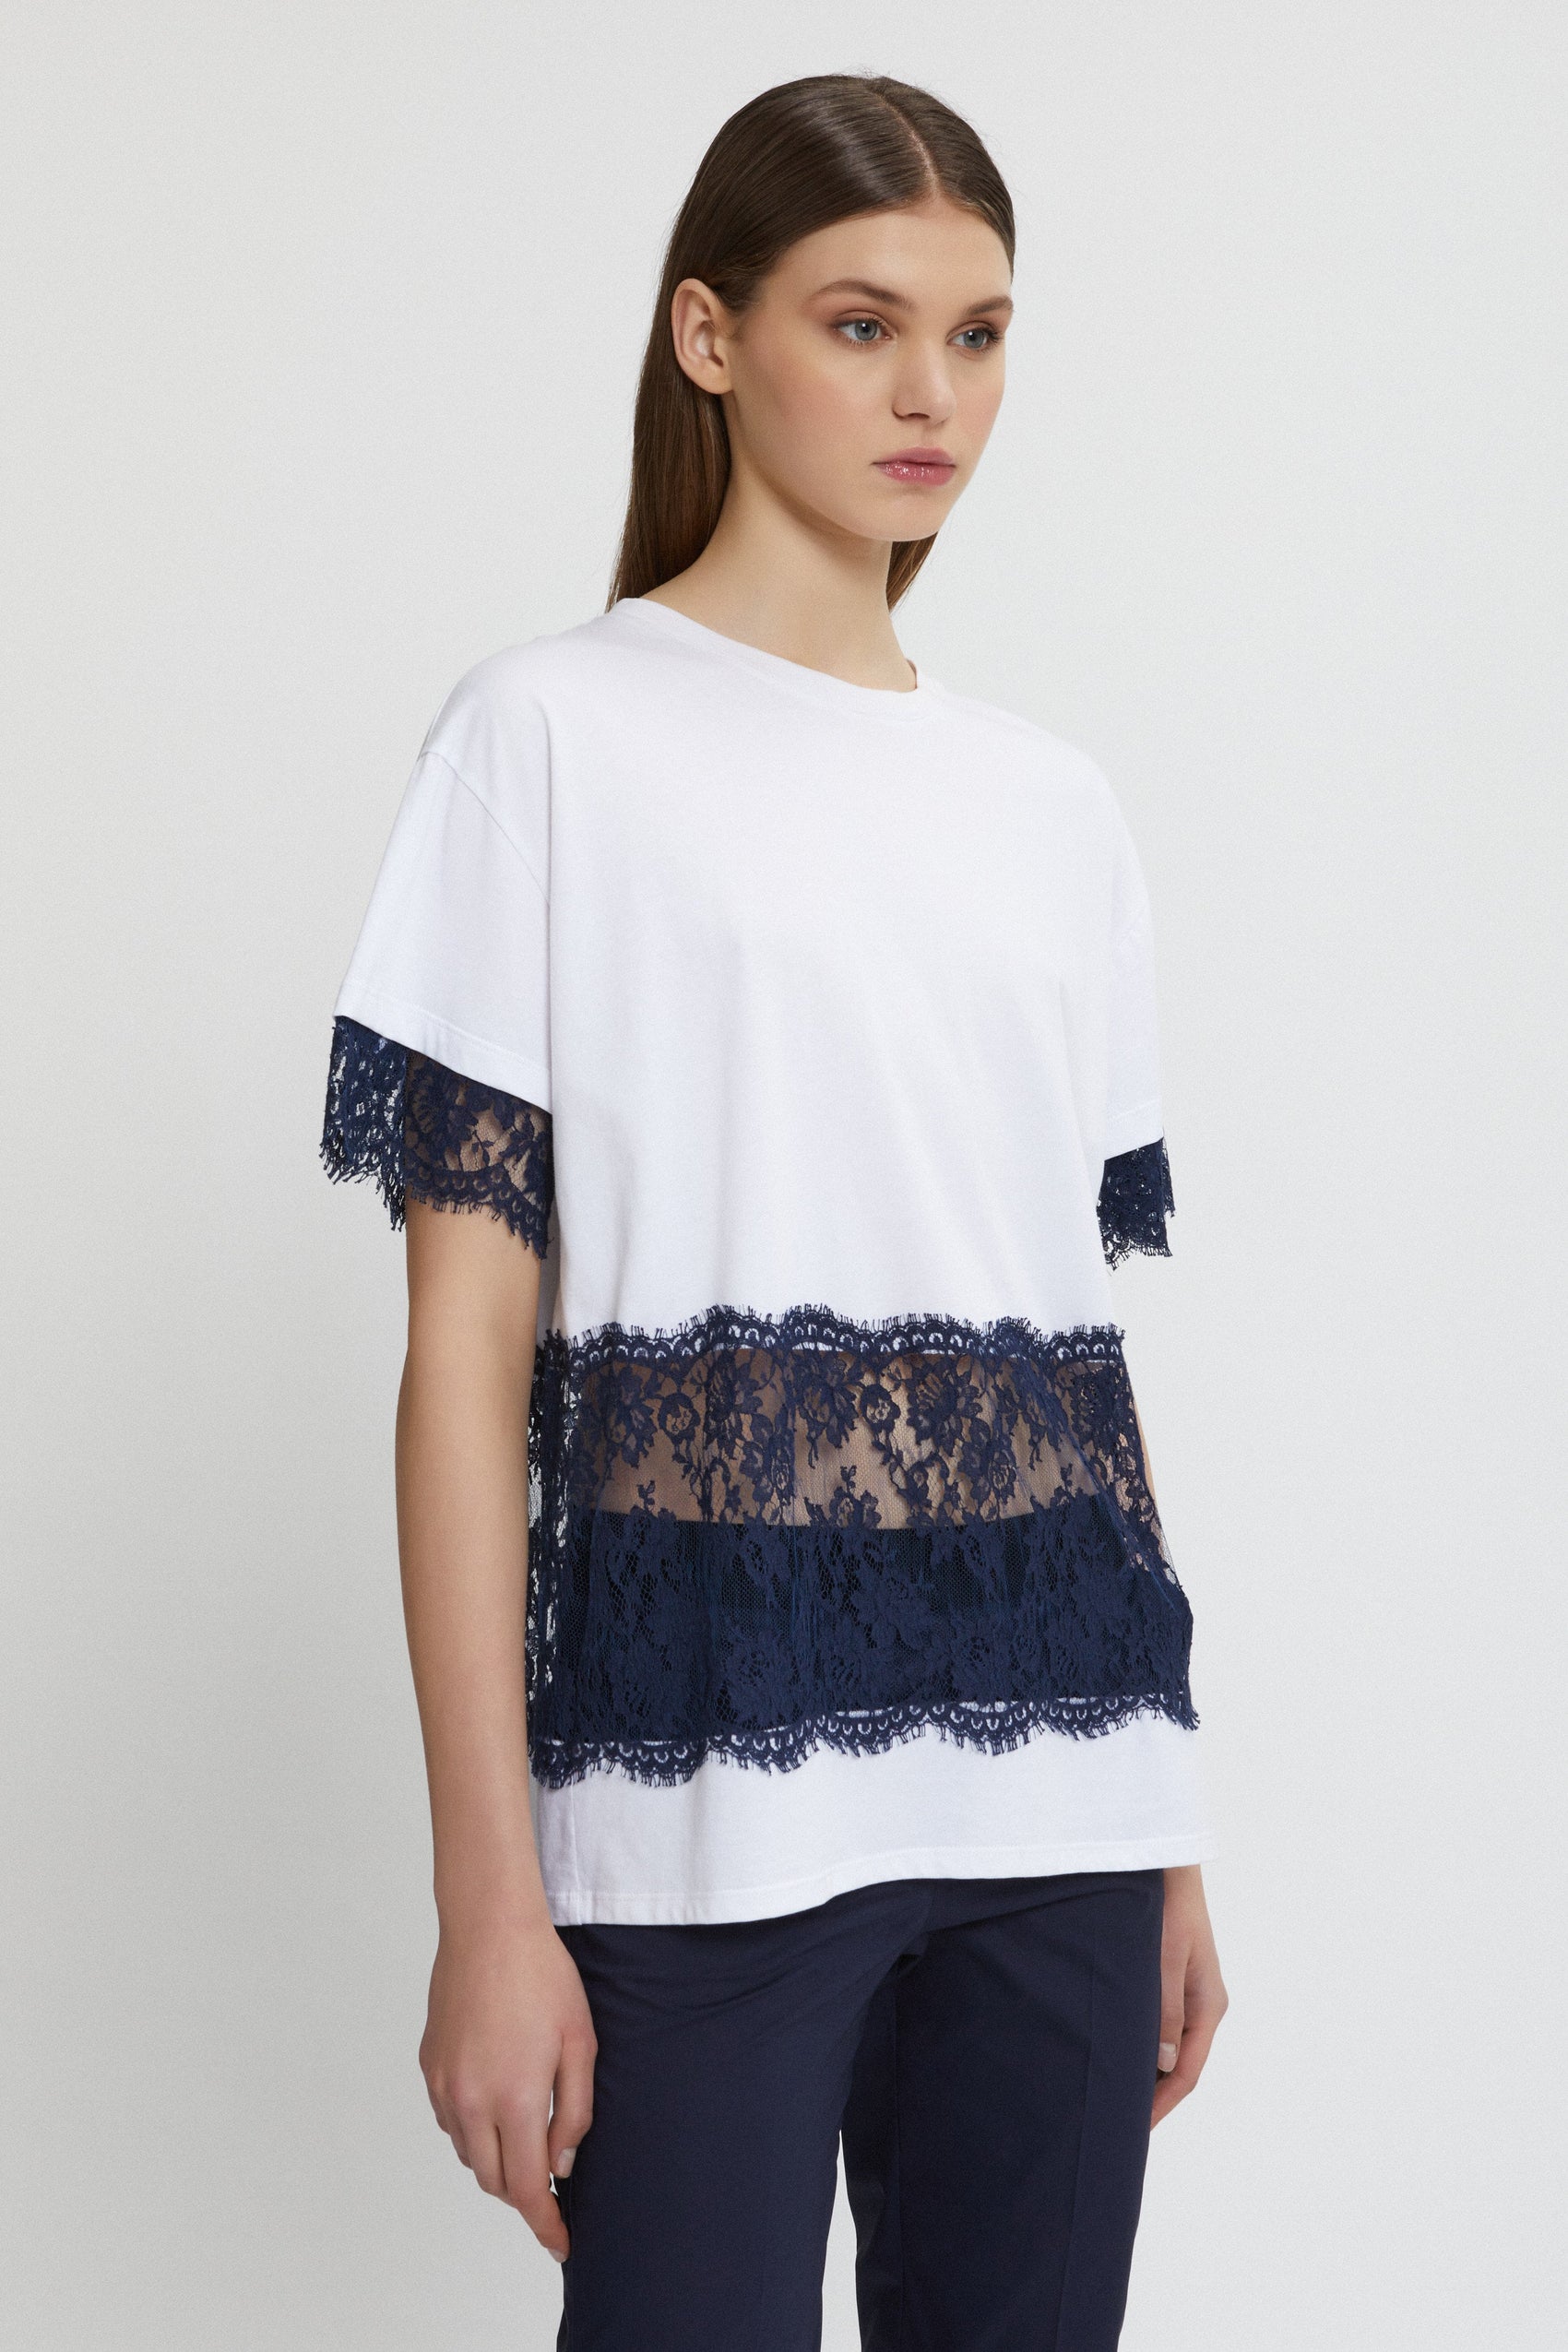 T-SHIRT IN JERSEY CON INSERTI IN PIZZO VALENCIENNE